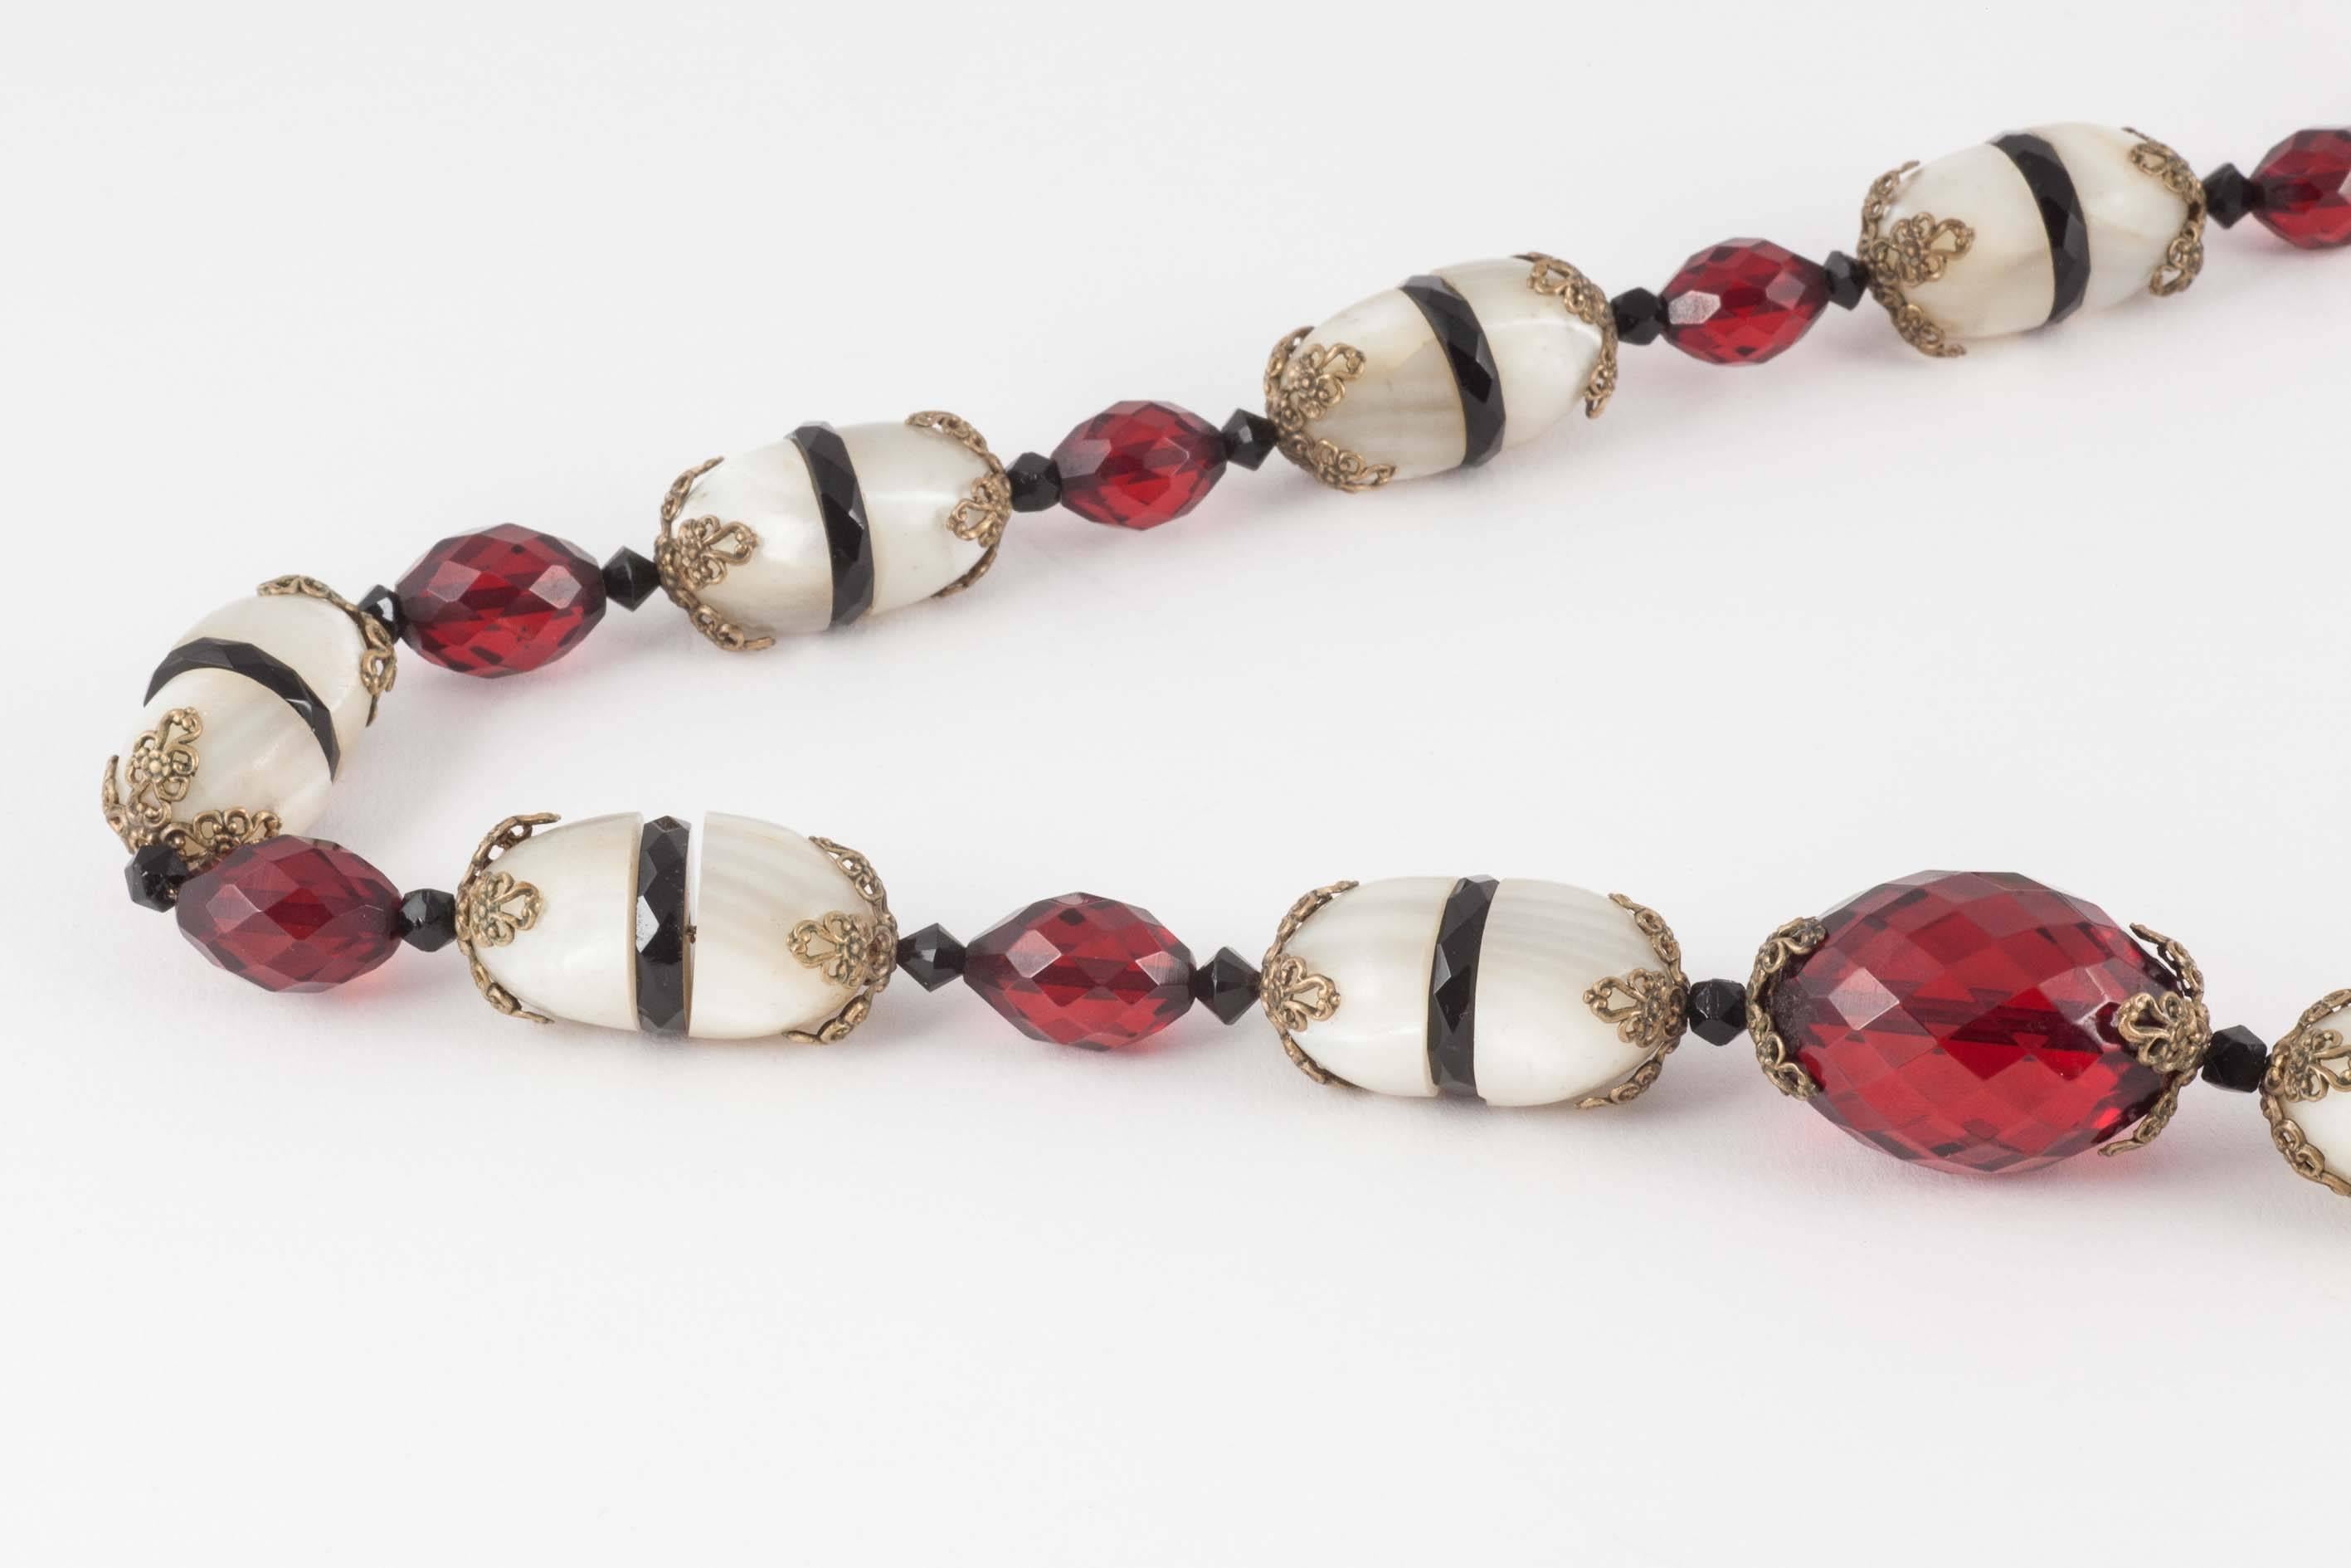 Women's Two Mother of Pearl/Glass bead necklaces, French, 1920s